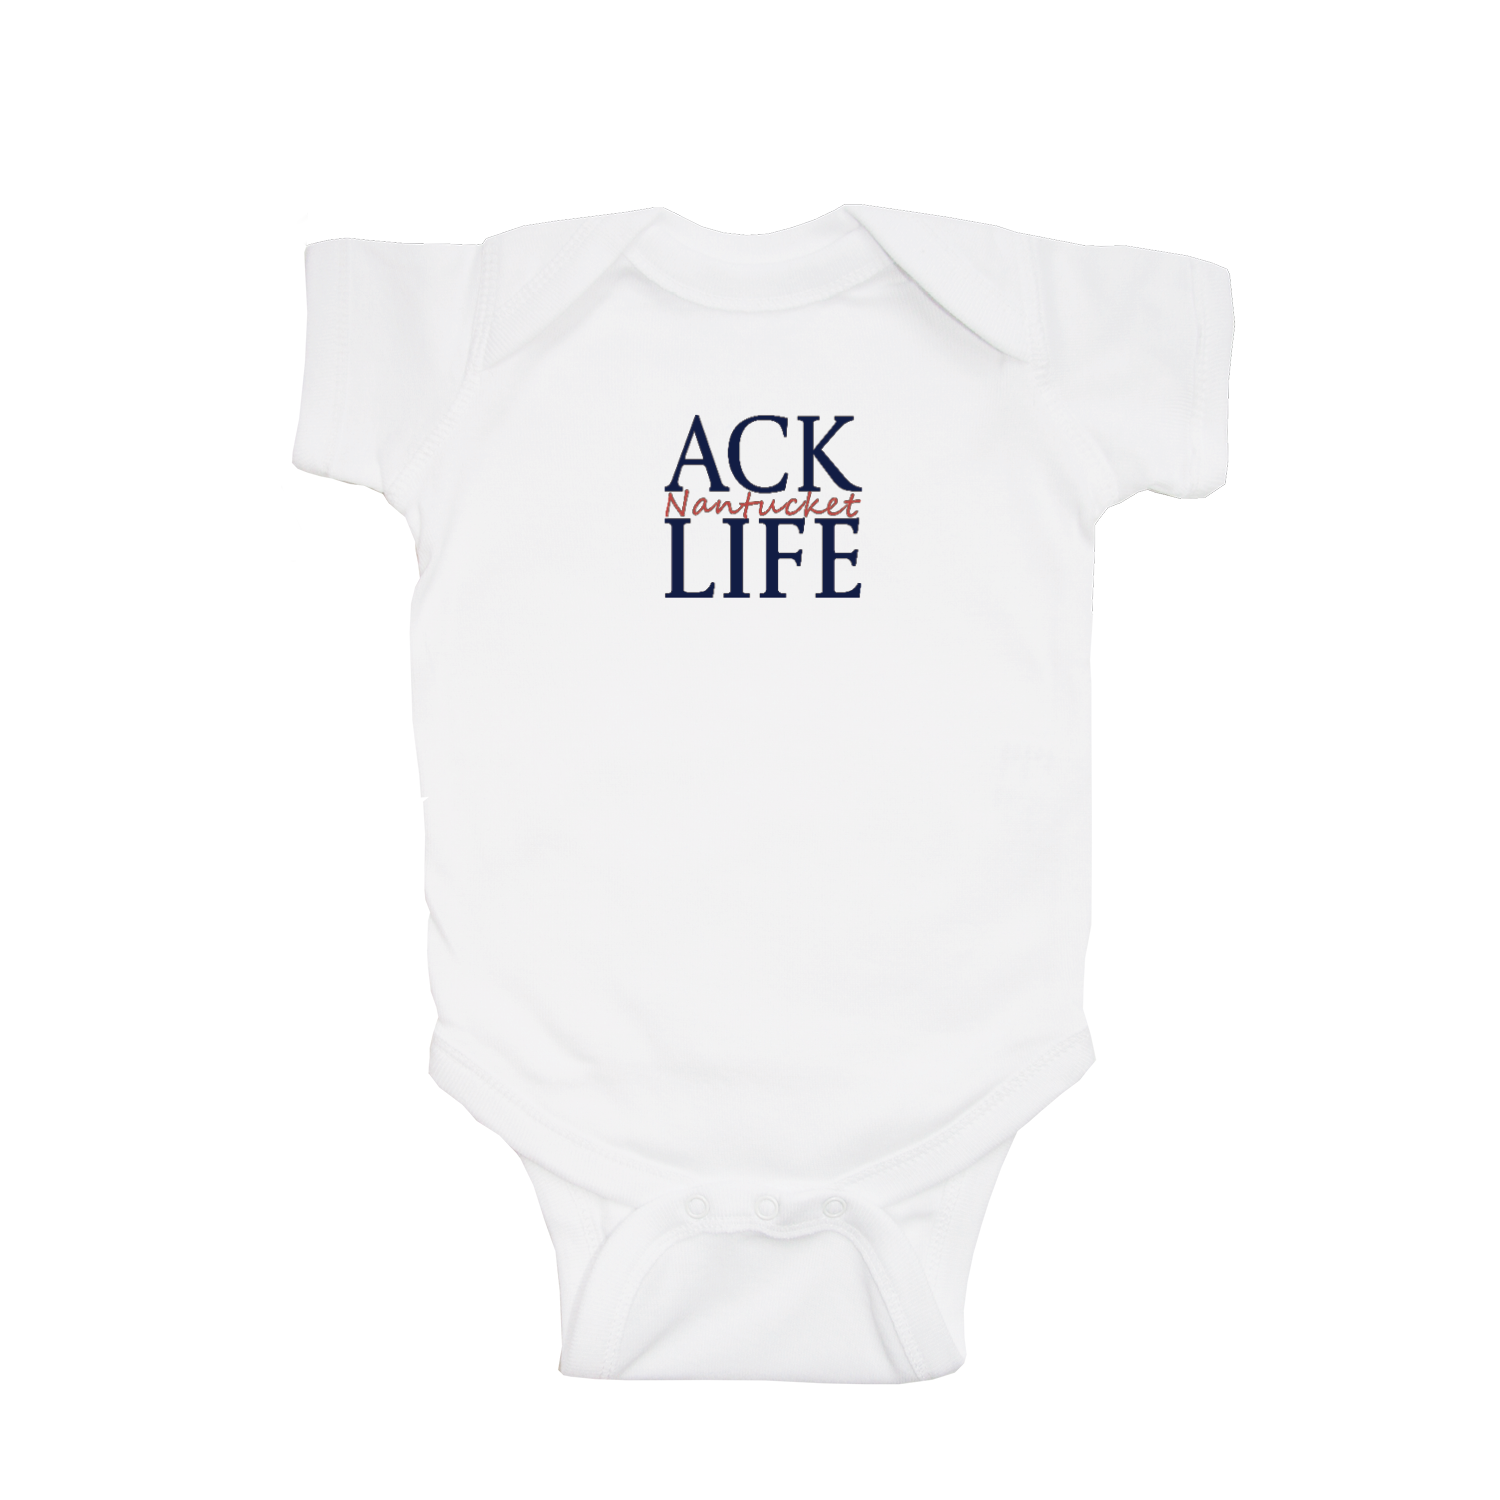 ACK Life Nantucket in nantucket red baby snap up short sleeve